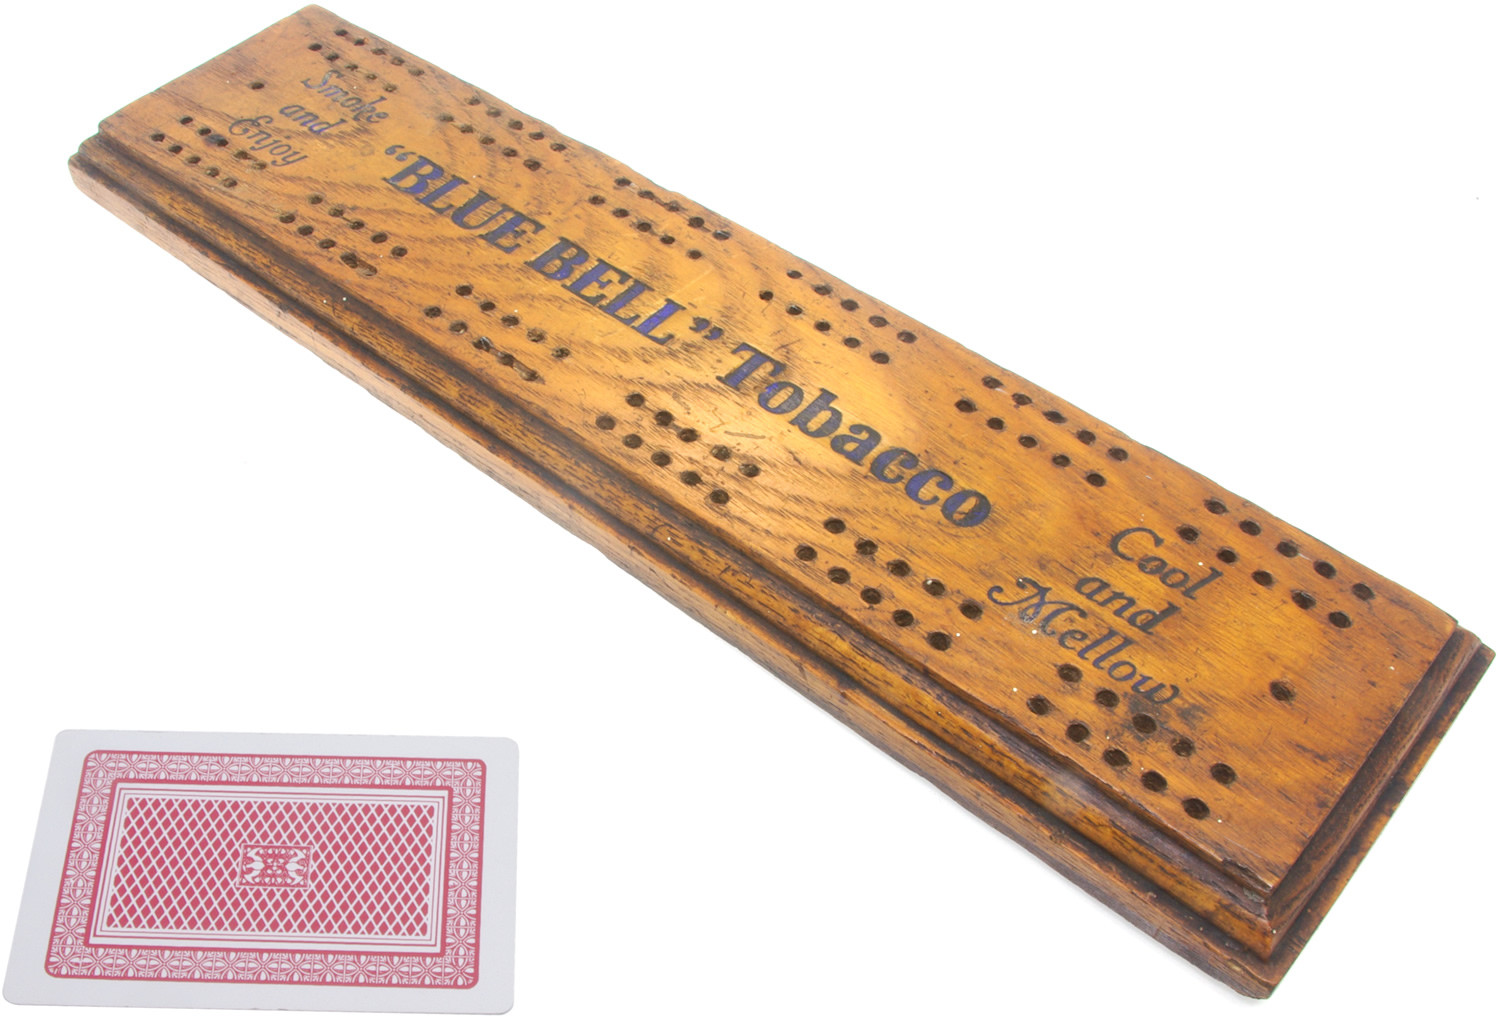 Blue Bell tobacco advertising cribbage board